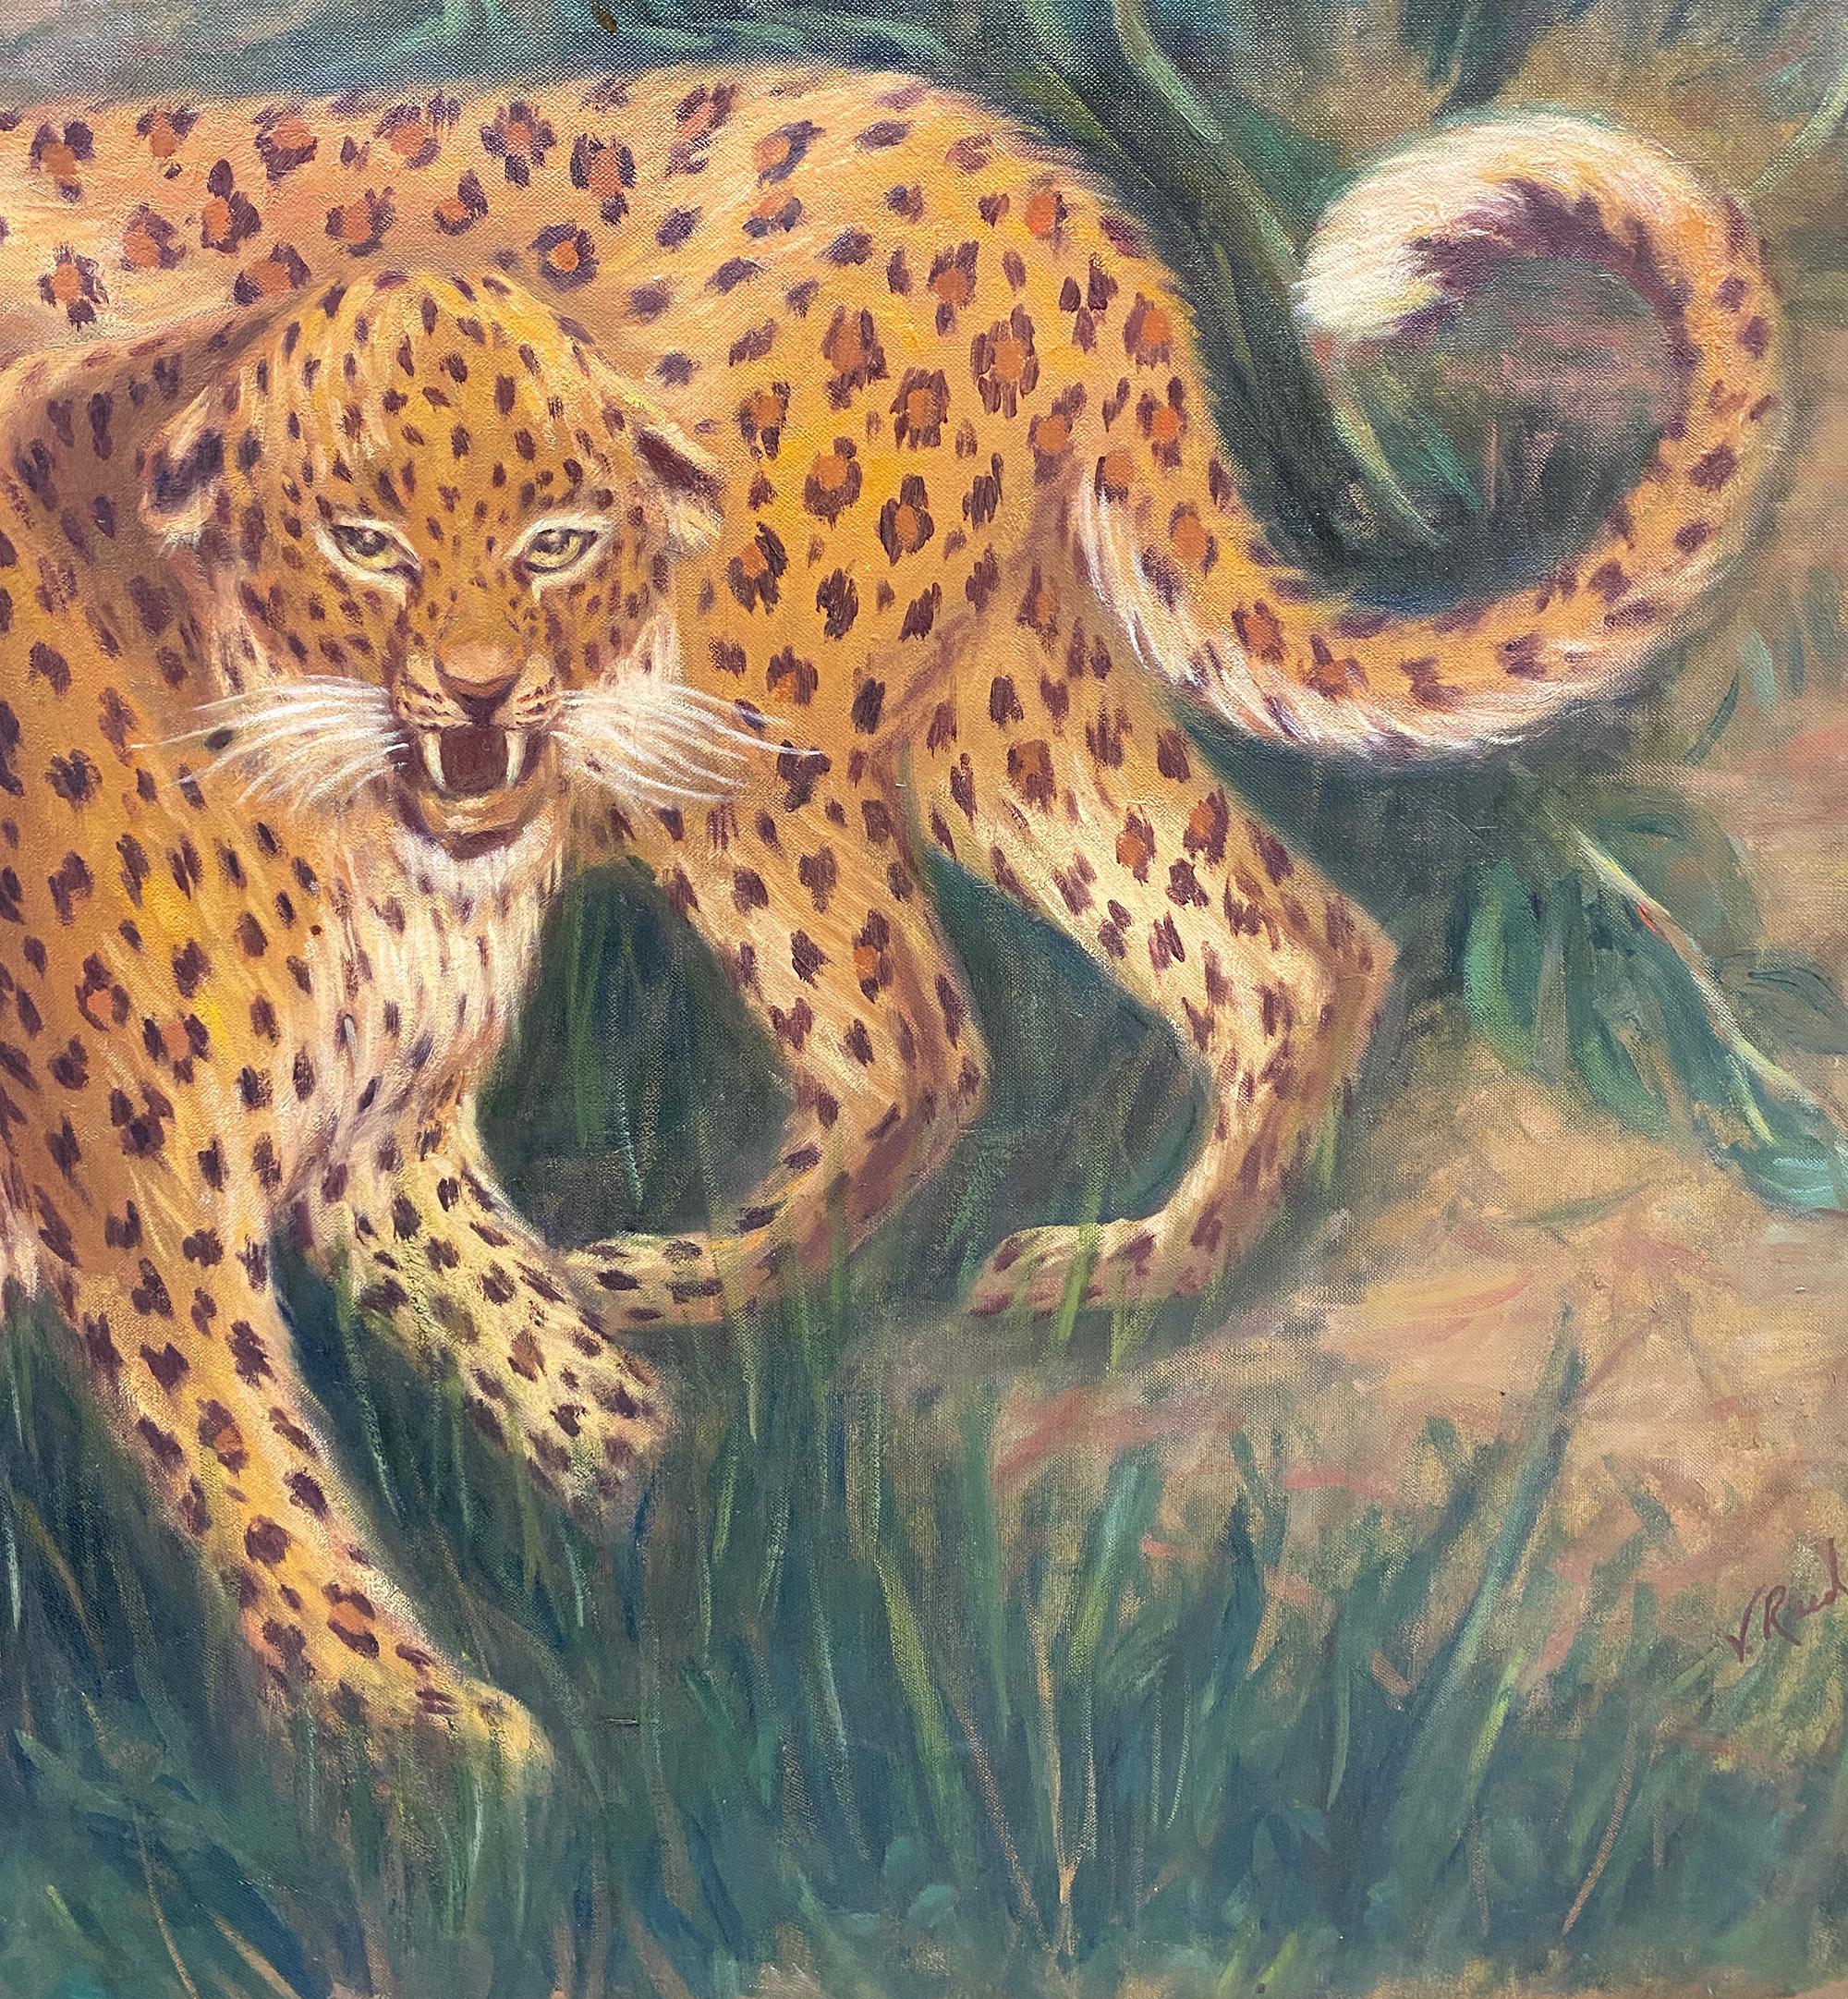 'Cheetahs on the Hunt Savannah Landscape' Oil on Canvas Painting by V. Reed 4